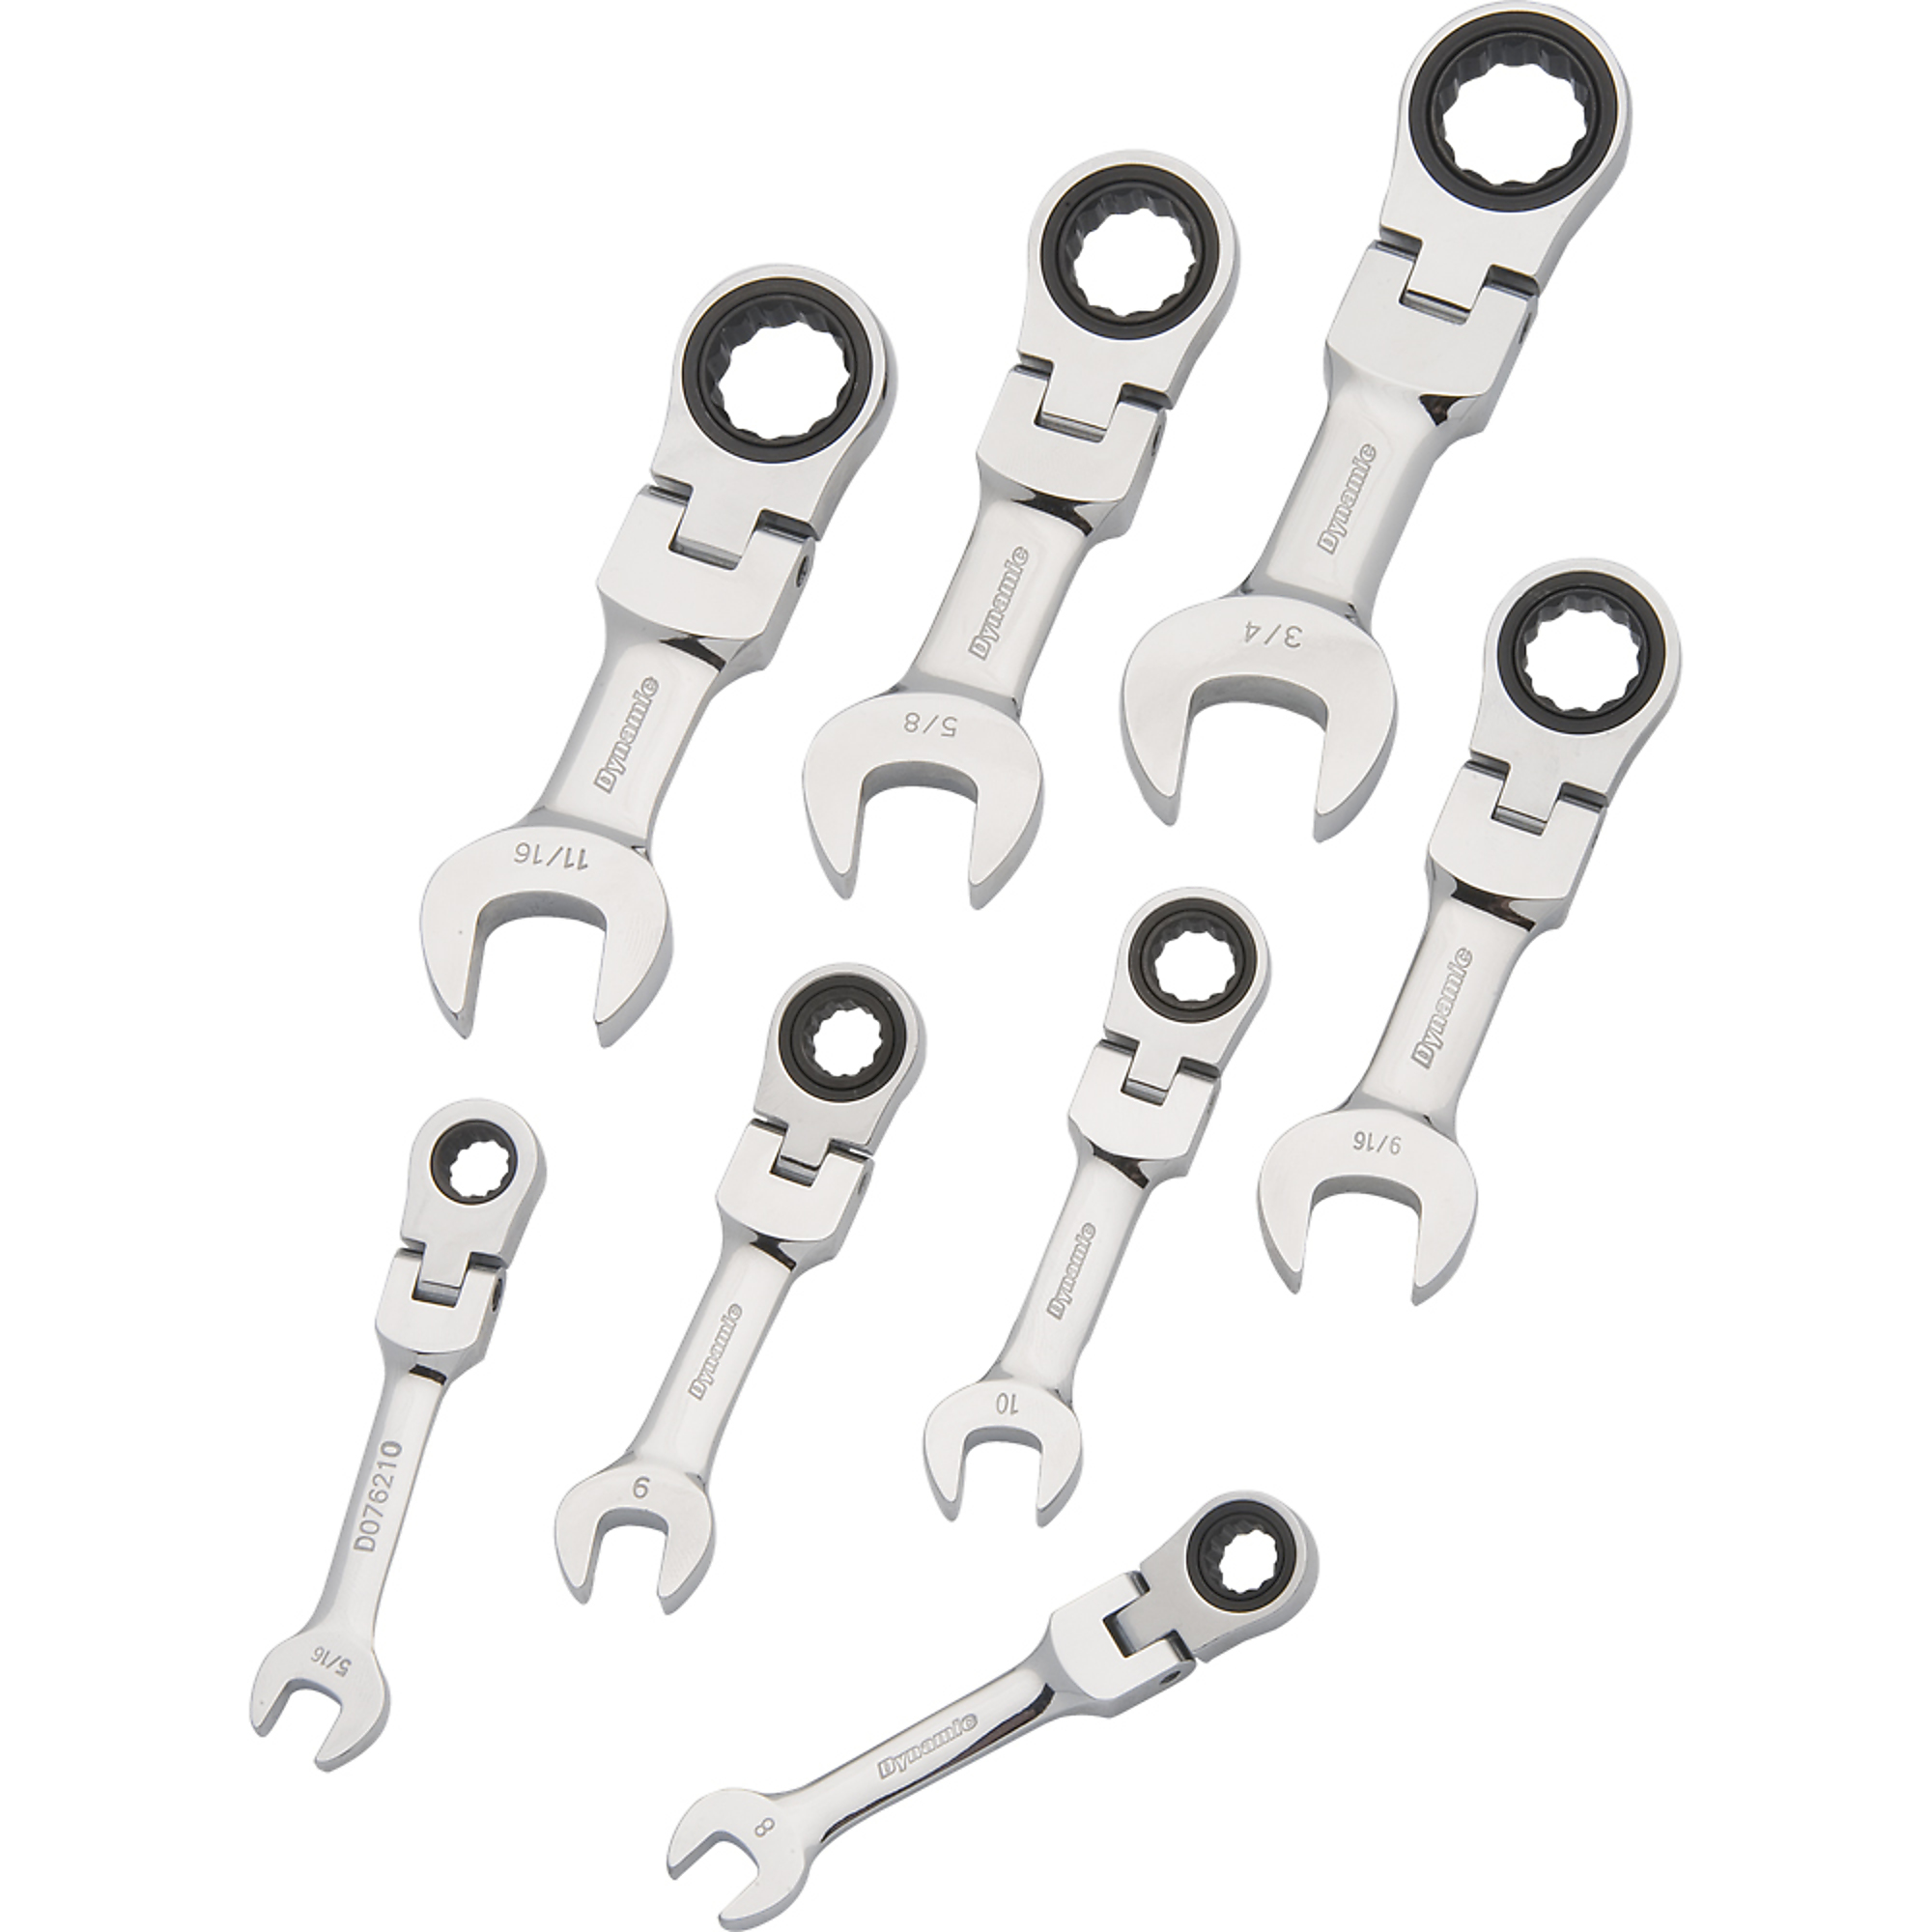 Dynamic Tools, 8 Piece SAE Stubby Flex Head Ratcheting Wrench Set, Pieces (qty.) 8 Tool Length 7.48 in, Measurement Standard Standard (SAE), Model